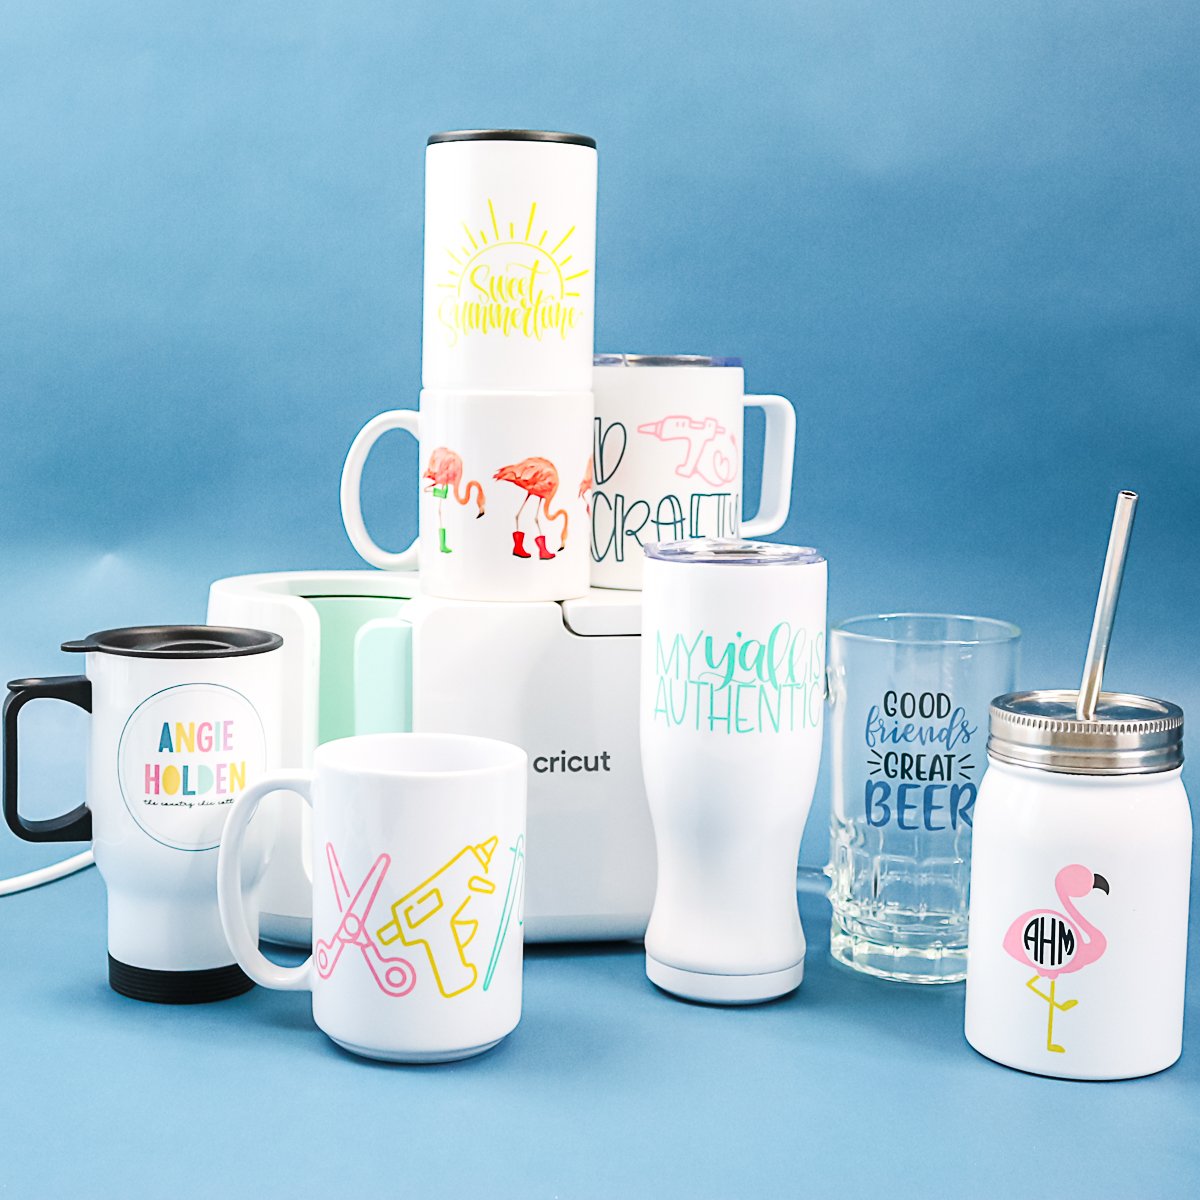 https://www.thecountrychiccottage.net/wp-content/uploads/2021/03/cricut-mug-press-other-mugs-and-tumblers-you-can-use-12-of-20.jpg